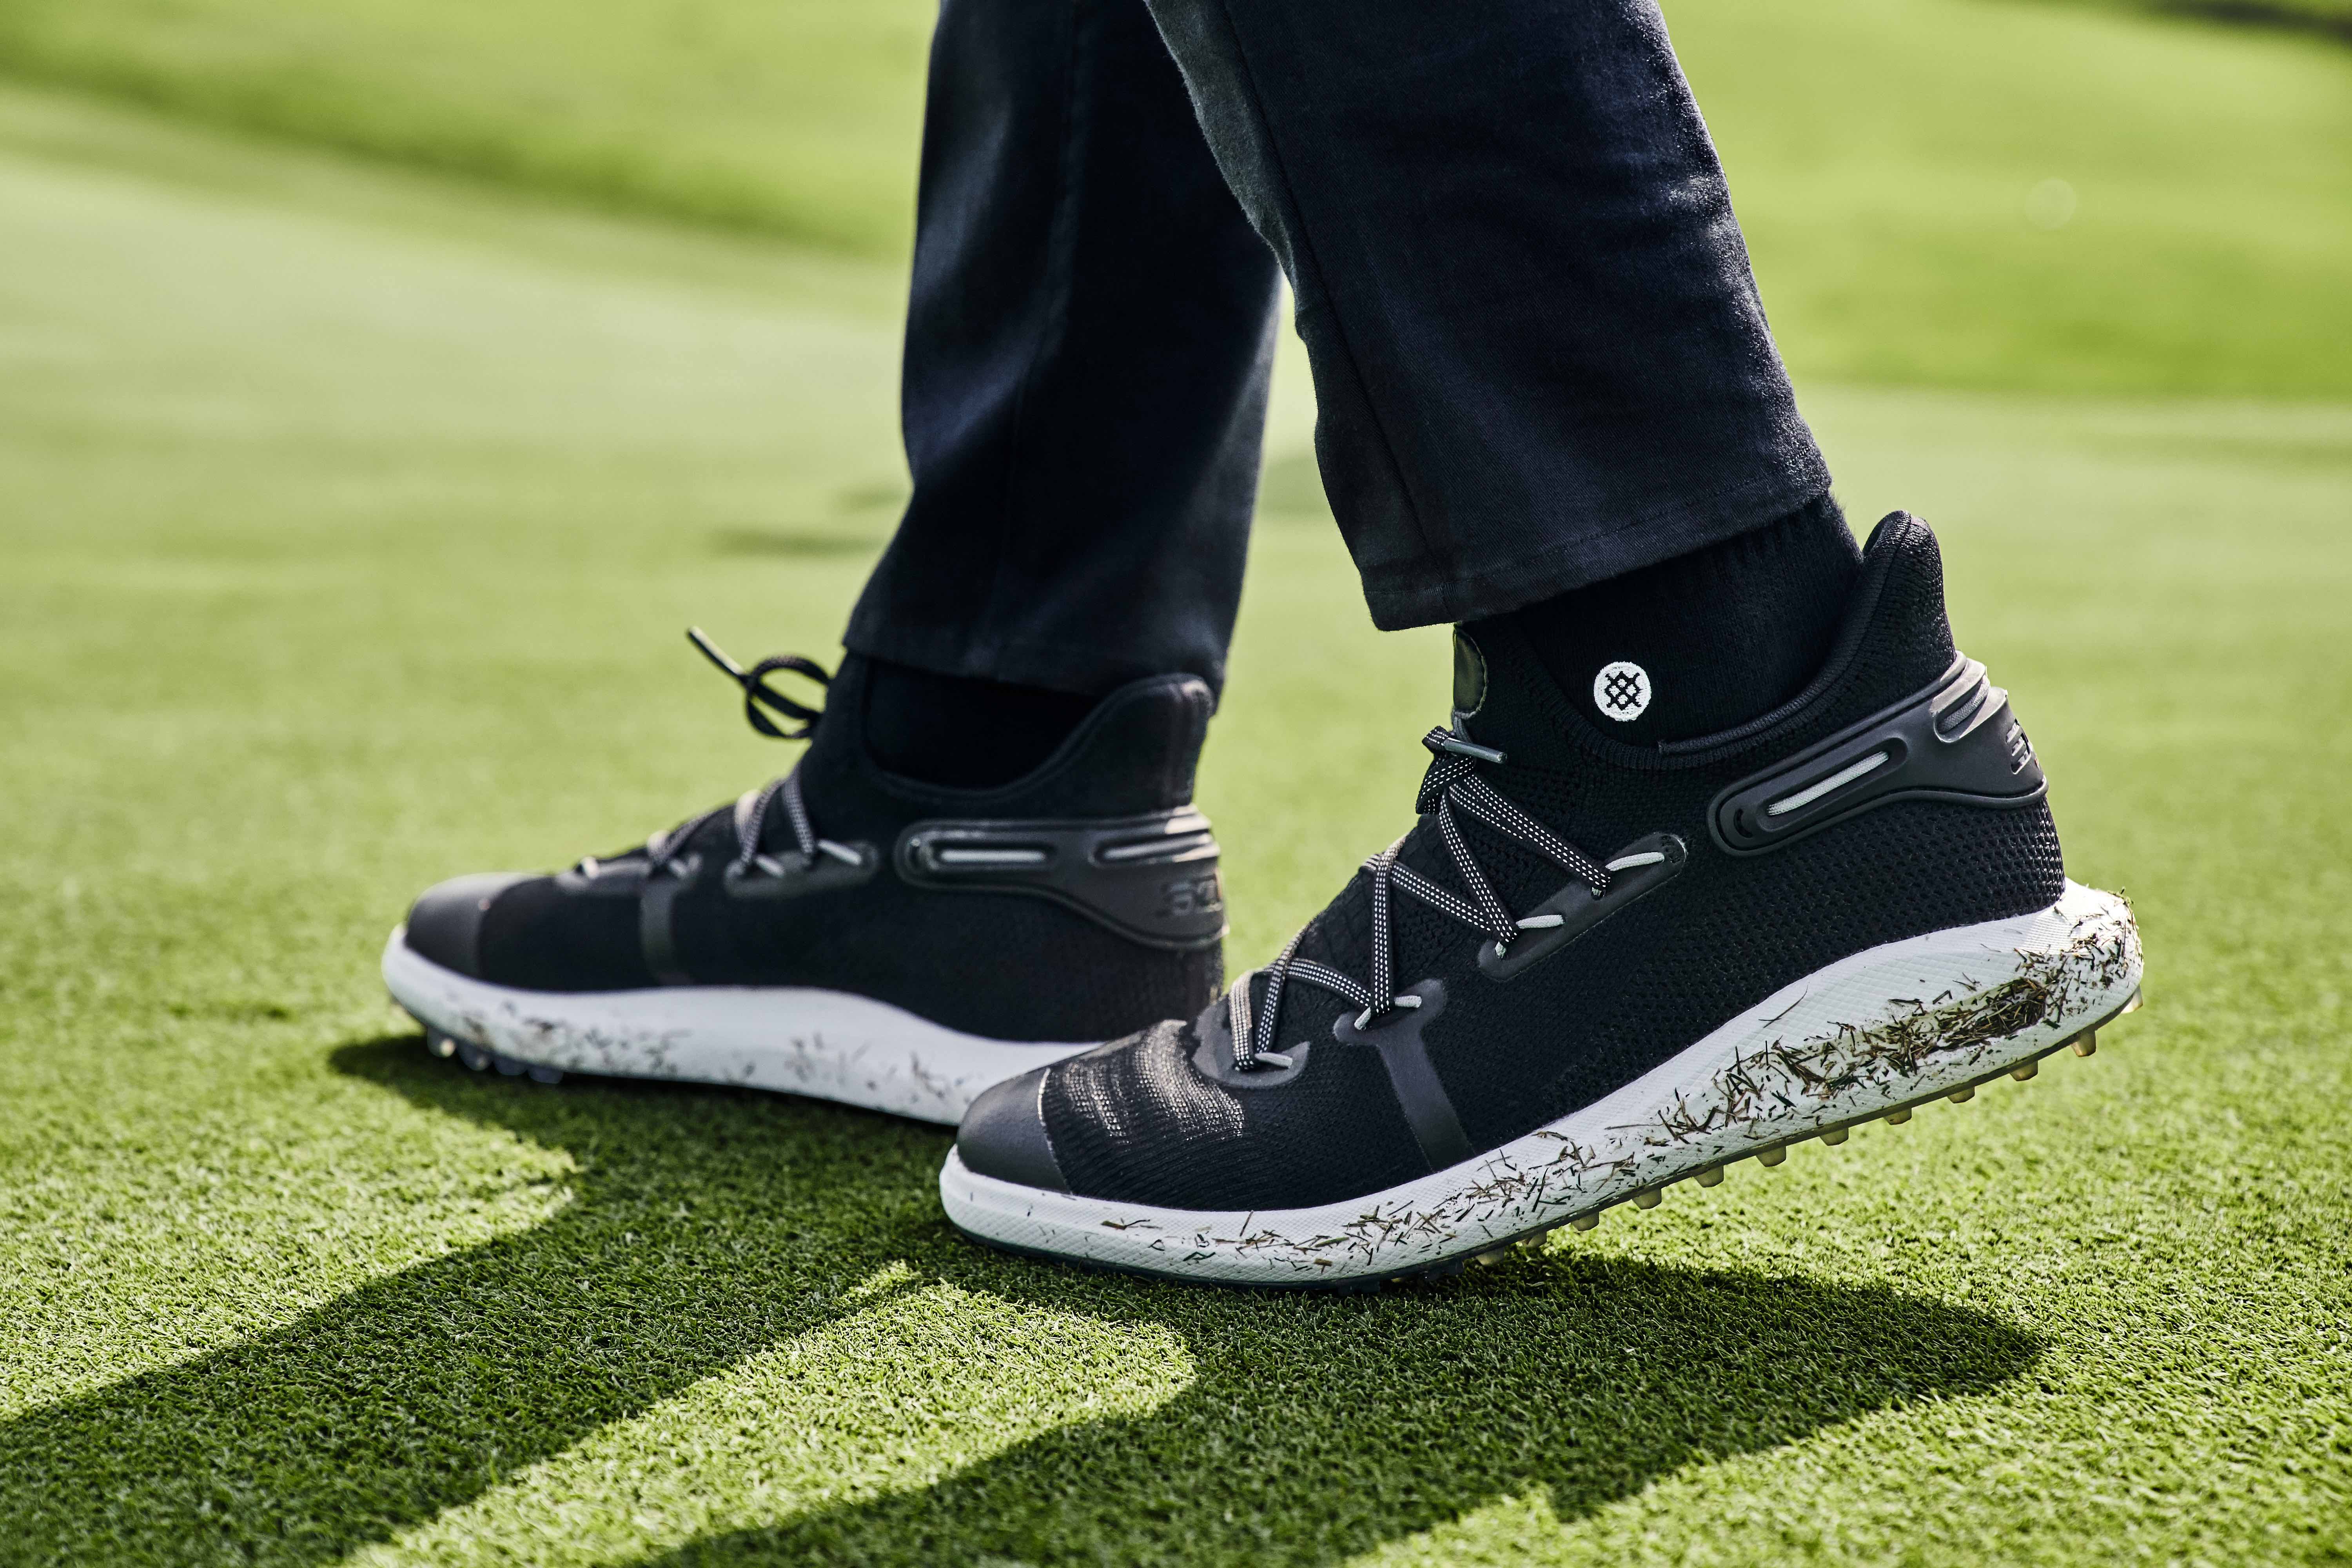 Stephen Curry and Under Armour launch SC30 Range Unlimited Golf